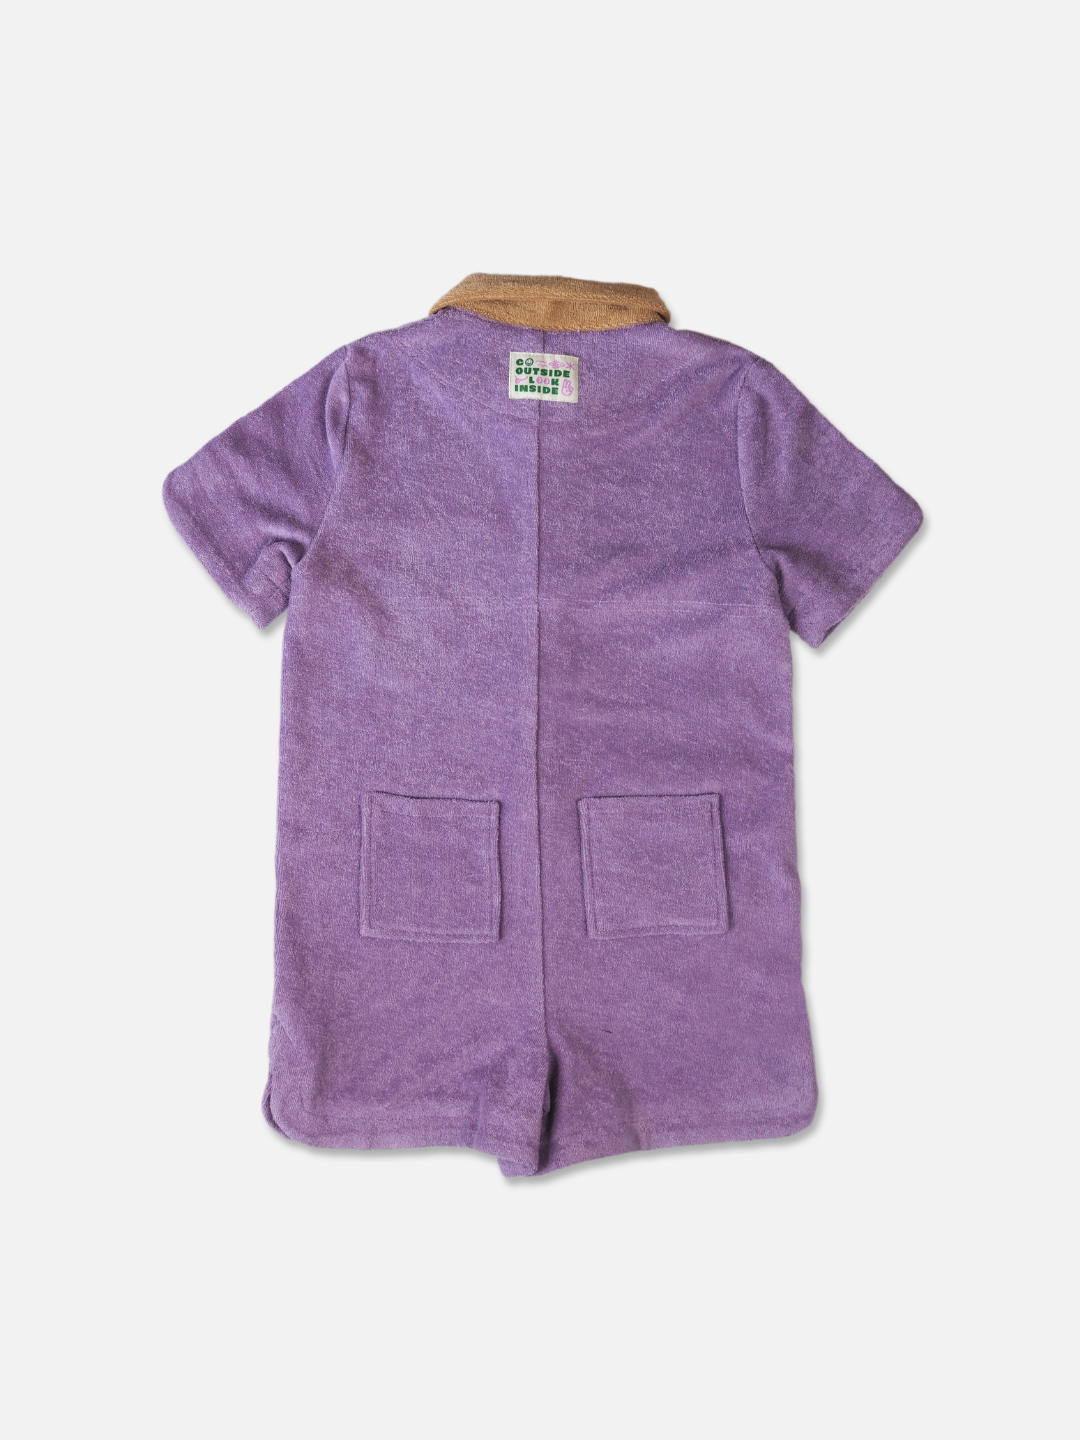 Rear view of a kids' jumpsuit in pale plum with sand collar, and two back pockets